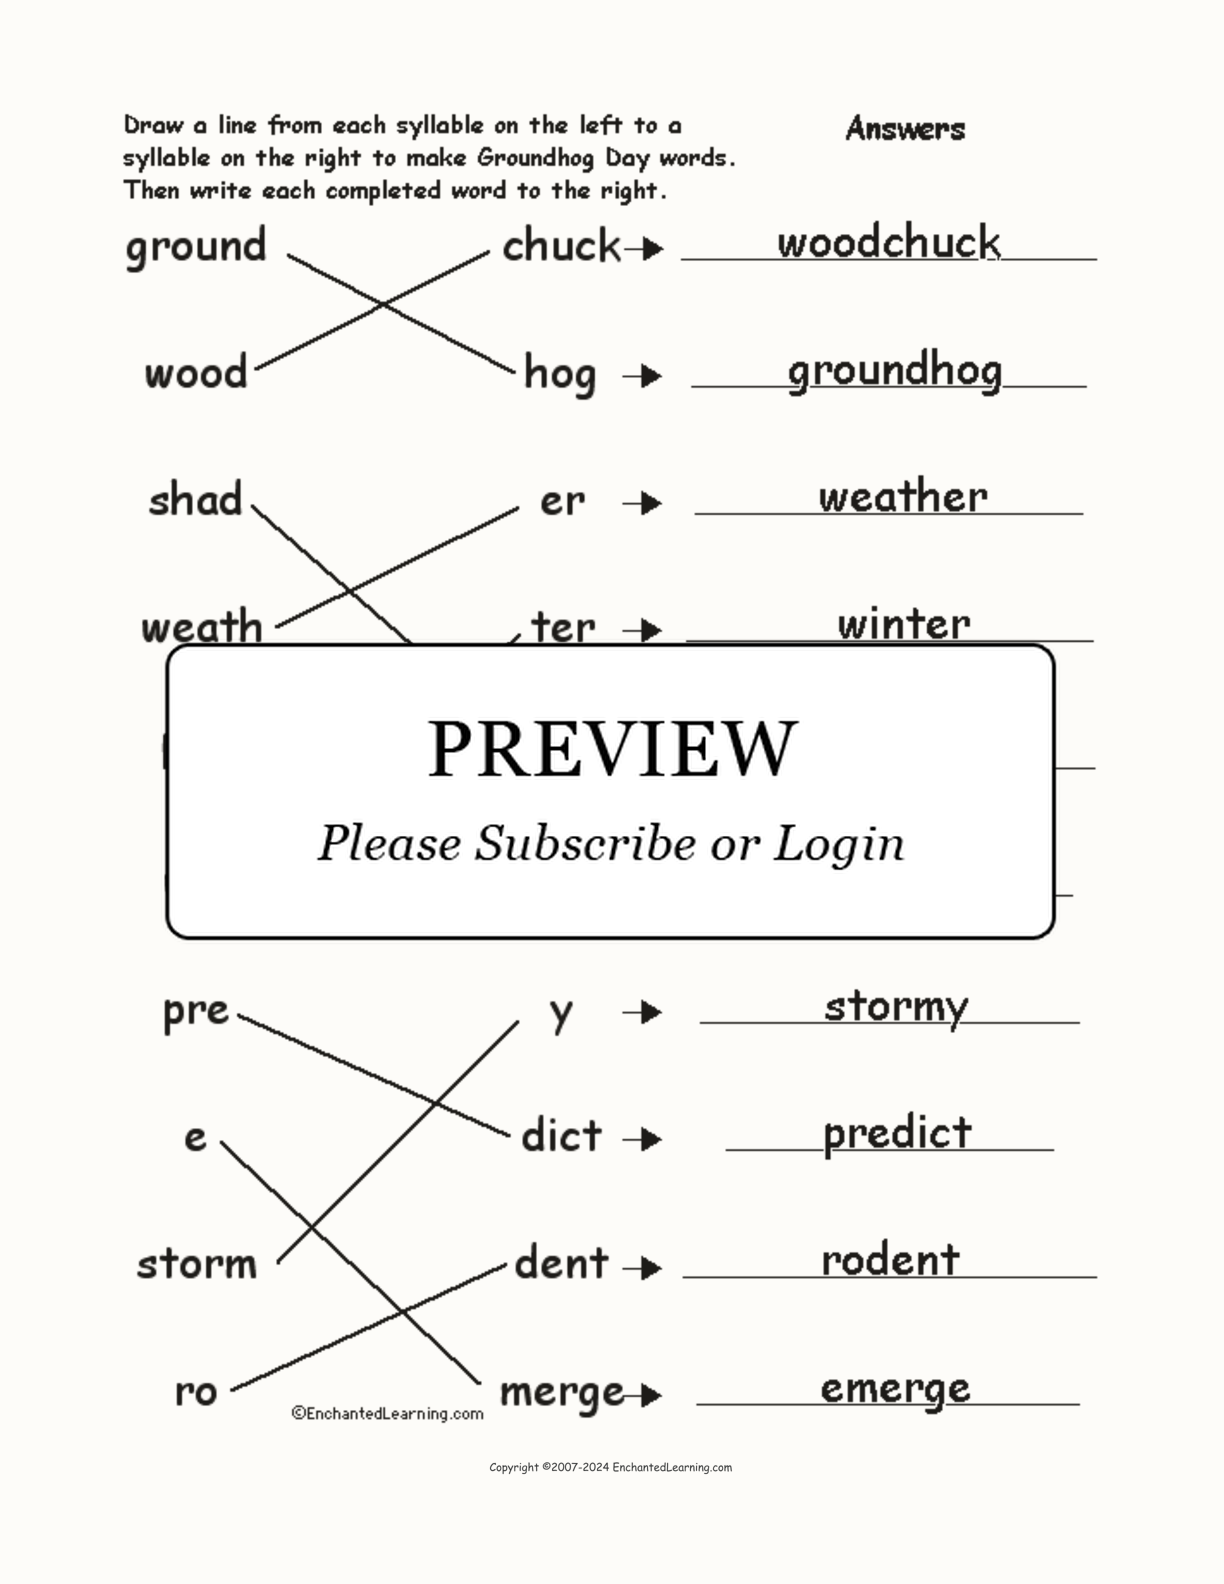 Match the Syllables: Groundhog Day Words interactive worksheet page 2